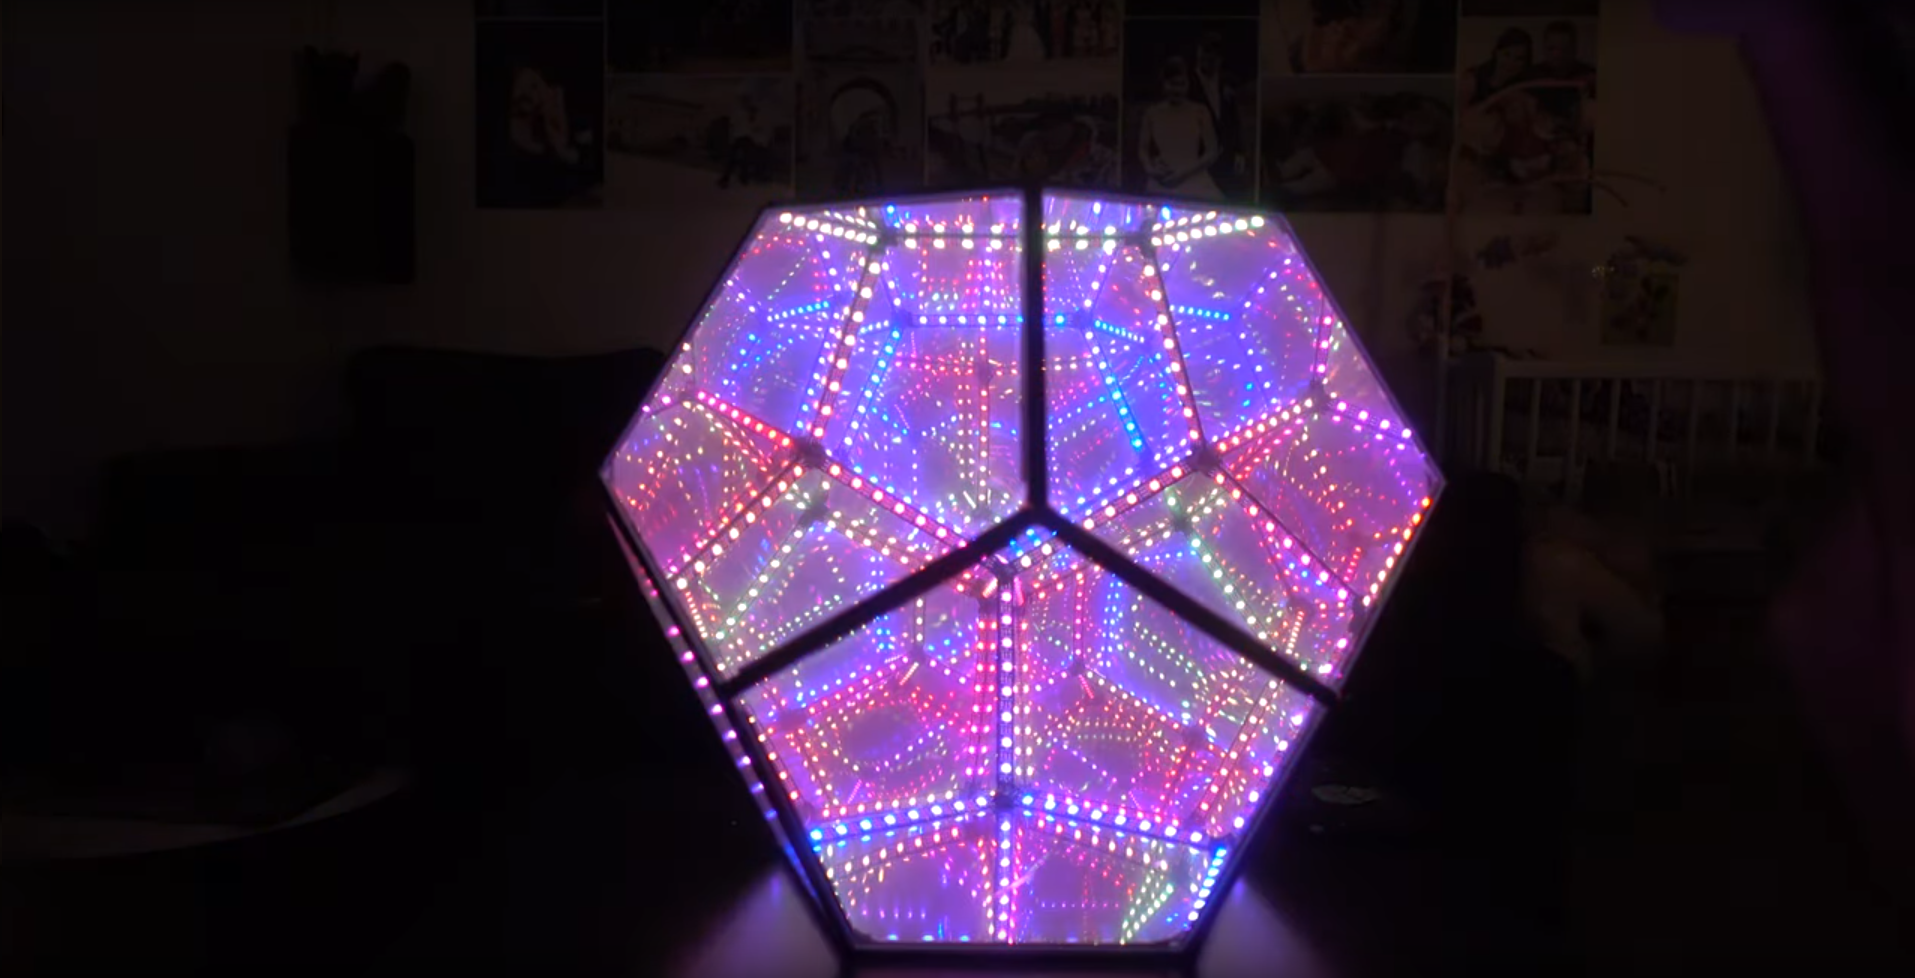 DIY Infinity Dodecahedron